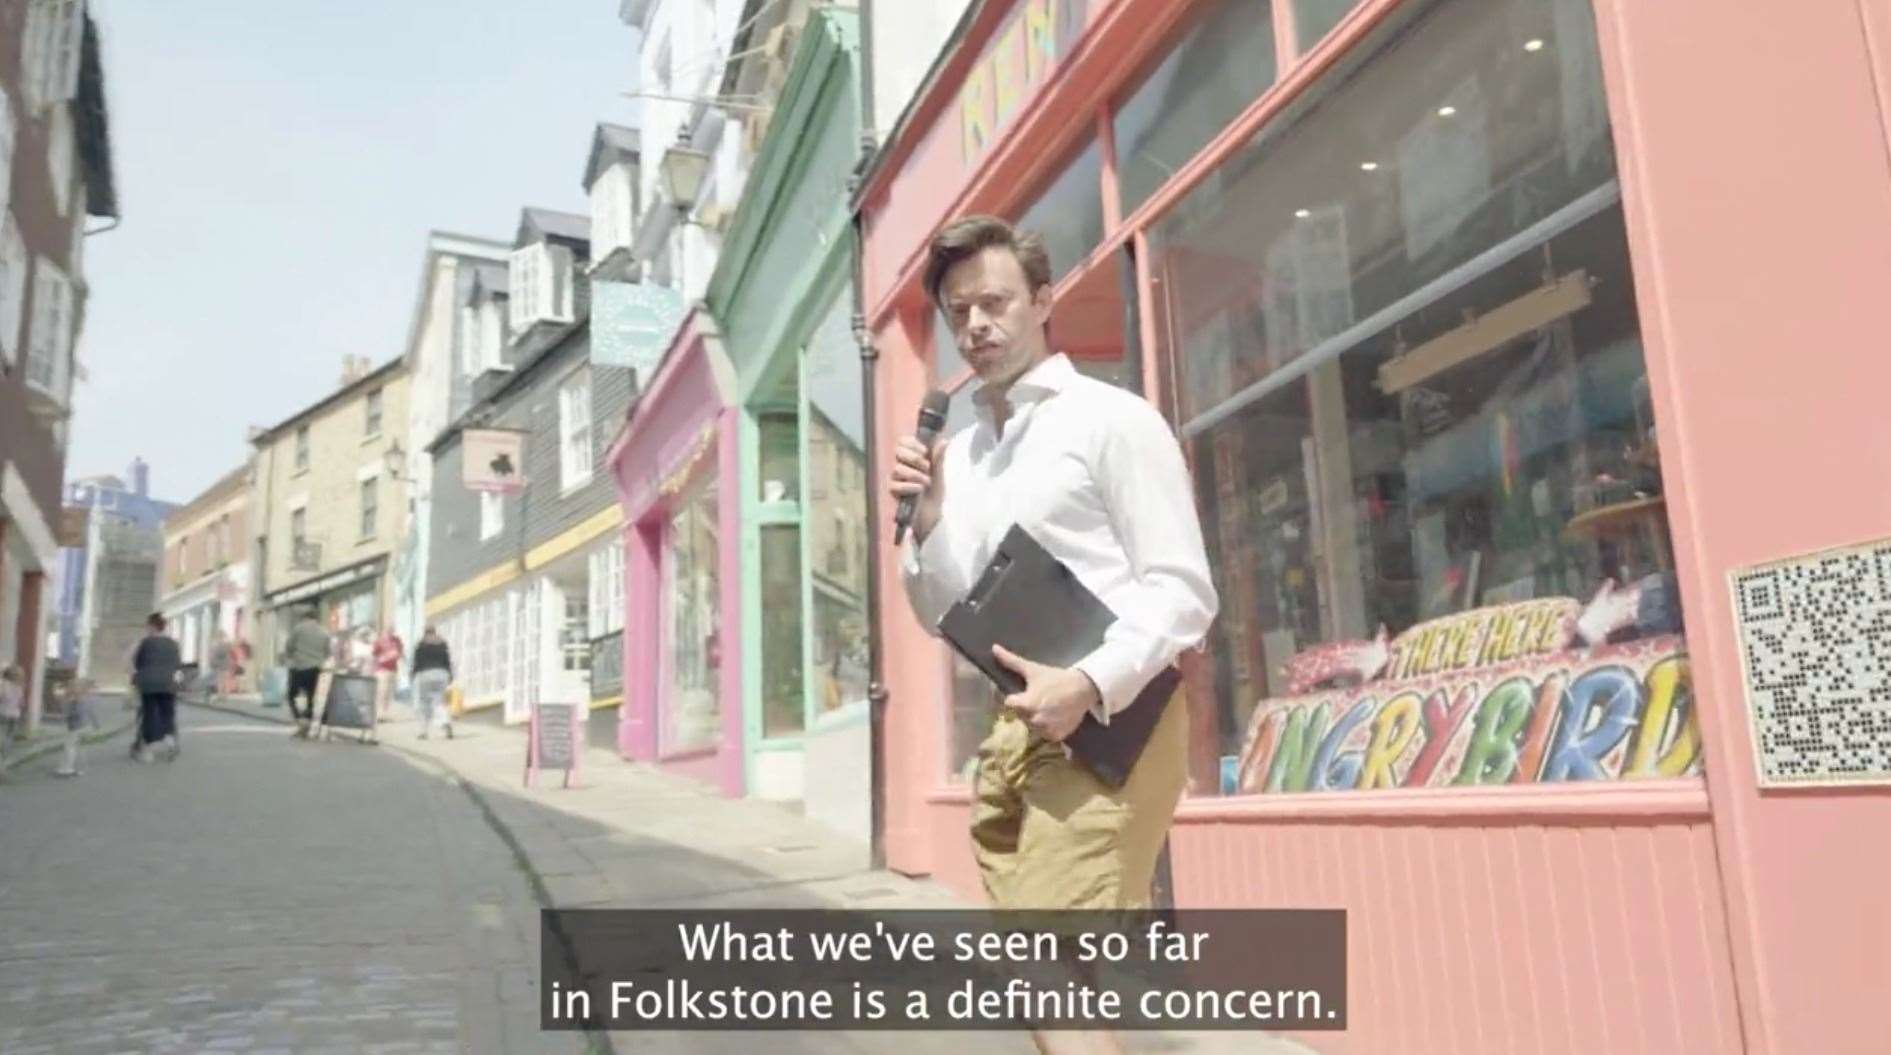 A still from a Twitter video of actor Jolyon Rubinstein speaking to people in Folkestone about immigration for spoof news segment. Picture: Jolyon Rubinstein